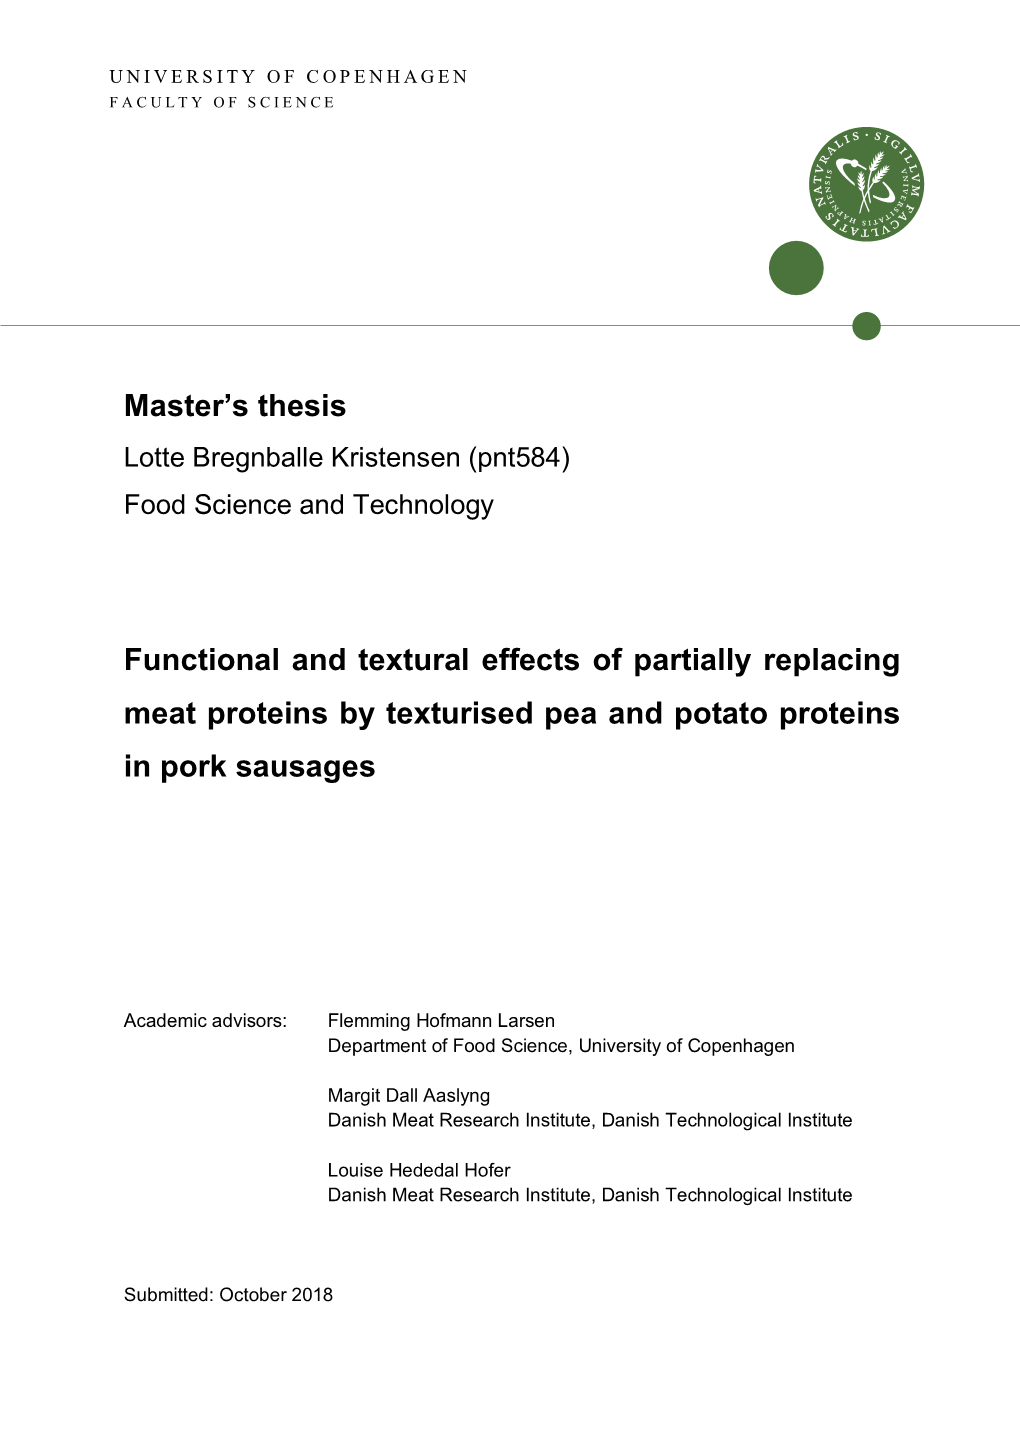 Master's Thesis Functional and Textural Effects of Partially Replacing Meat